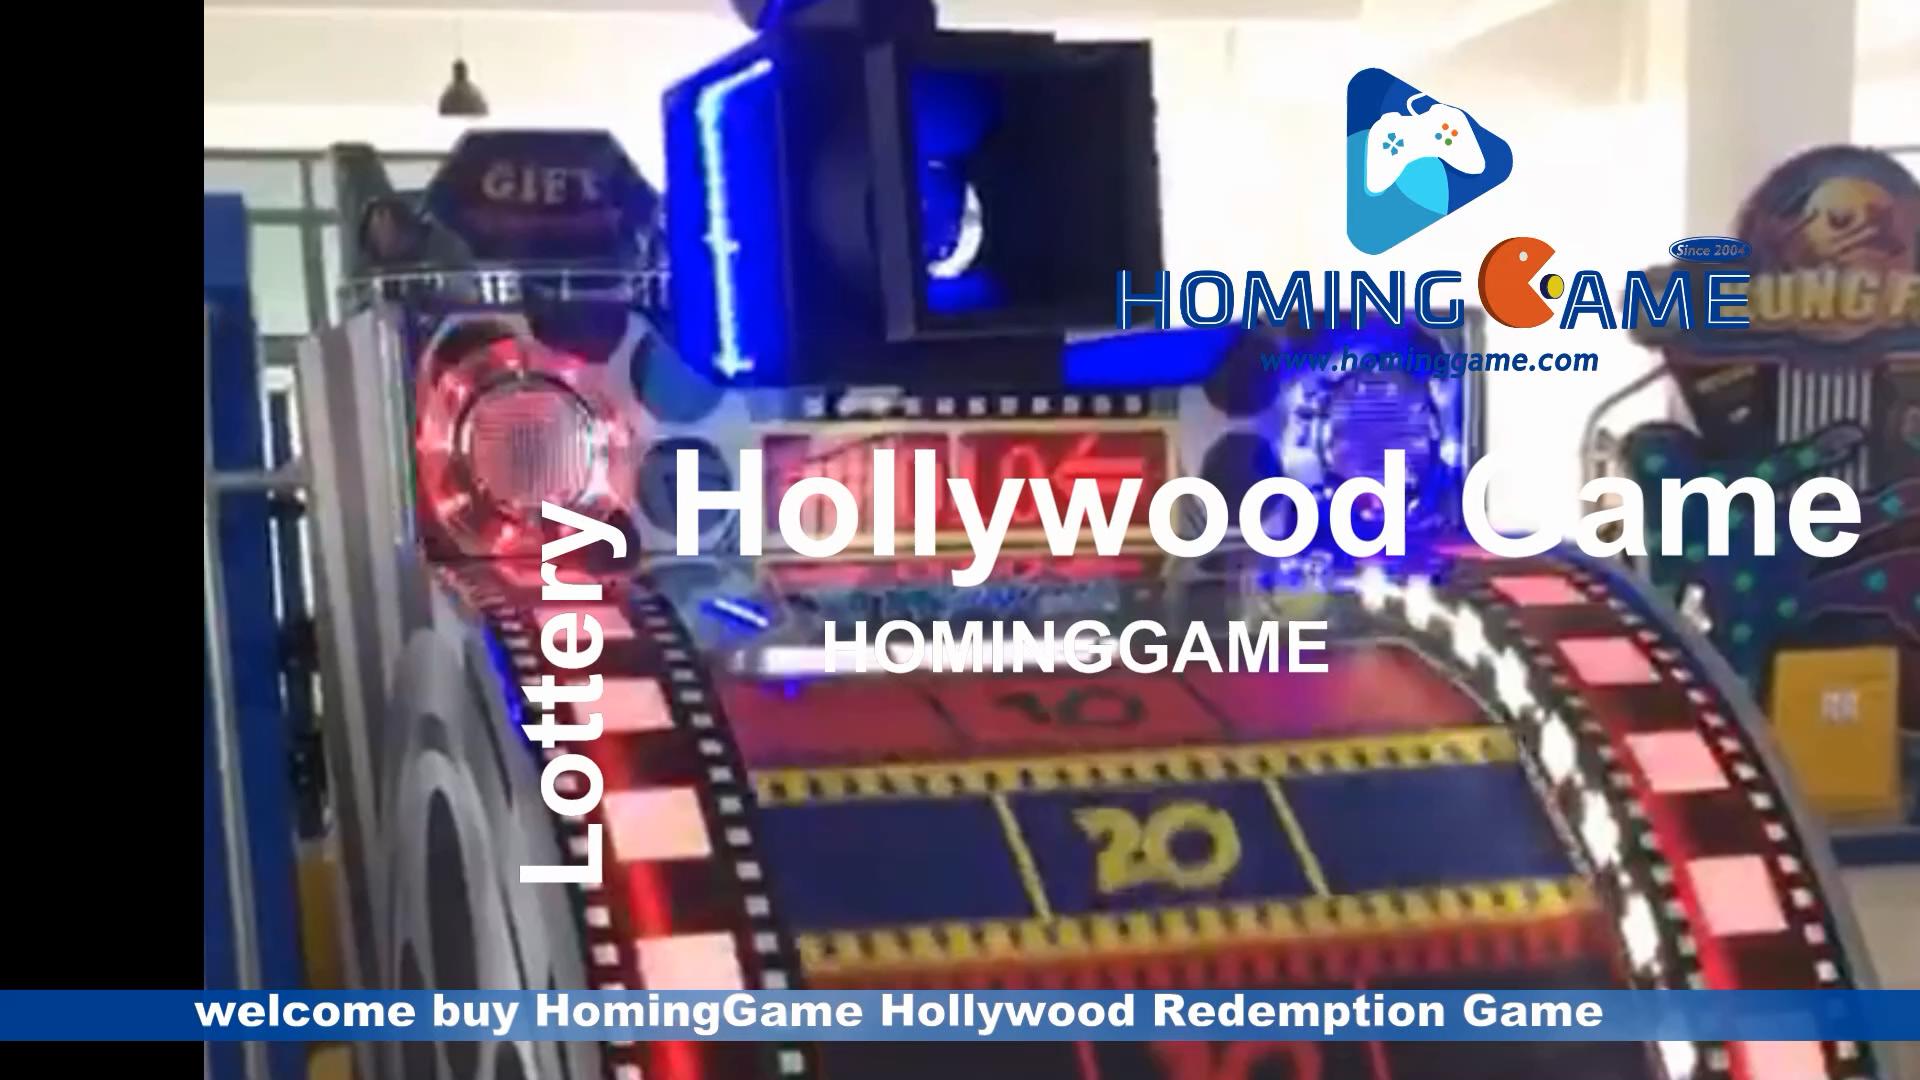 hollywood lottery game machine,hollywood lottery redemption game machine,hollywood game machine,kids hollywood lottery game machine,kids game machine,lottery game machine,lottery redemption game machine,redemption ticket game machine,ticket game machine,lottery ticket redemption game machine,kids game,game machine,game machine for sale,game machine manufacturer,game machine supplier,coin operated game machine,kids  game machine,kids game equipment,amusement park game equipment,indoor game machine,electrial game machine,slot game machine,arcade games,game zone game machine,entertainment game machine,entertainment game,sports game,outdoor game machine,amsuement park game equipment,coin games,redemption game,redemption ticket game,coin operated ticket redemption game machine,hominggame lottery game machine,hominggame redemption game machine,hominggame,www.gametube.hk,family entertainment game machine